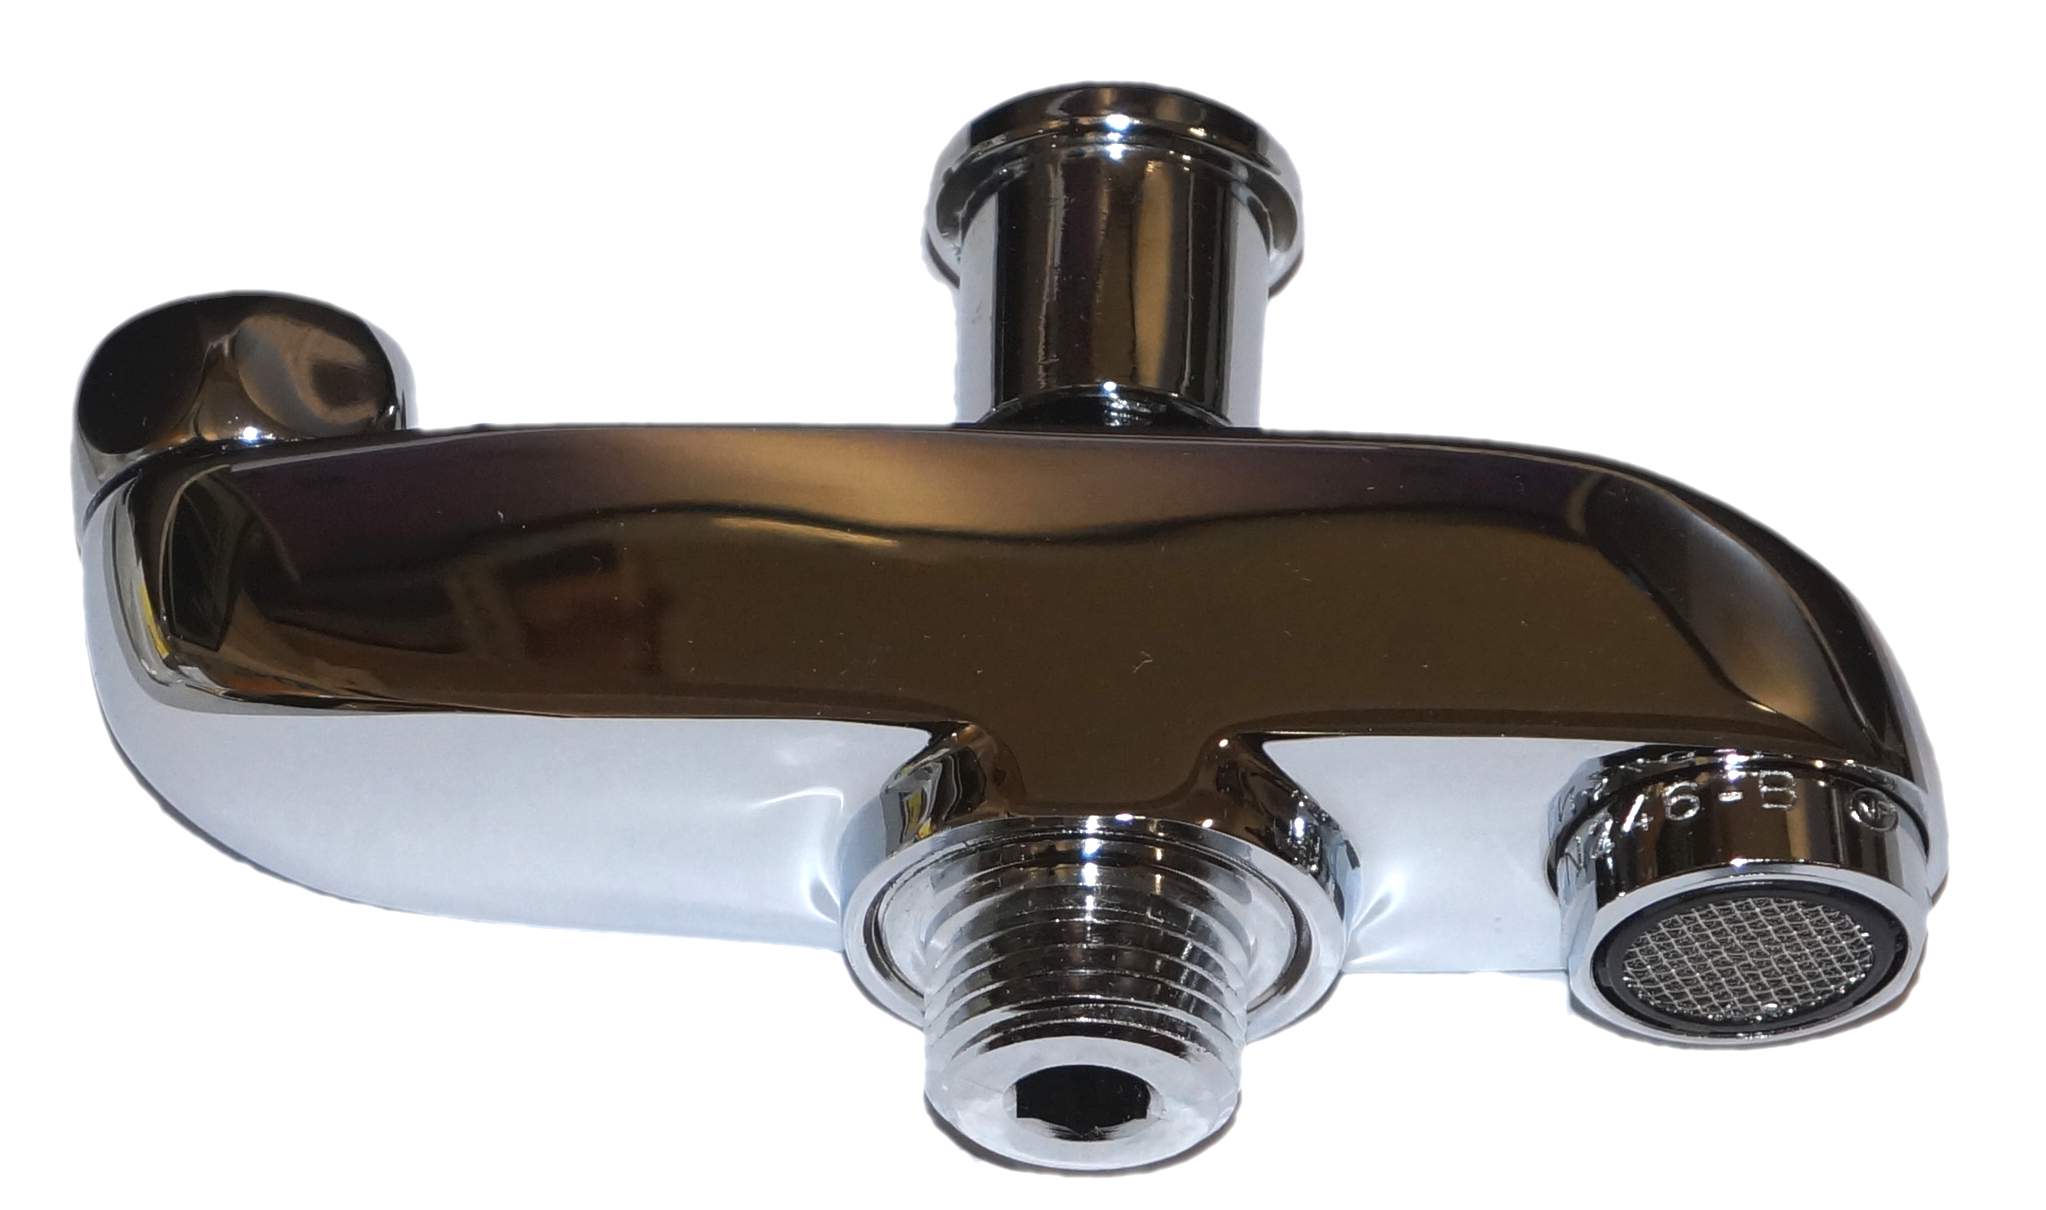 Bath and shower spout with holder